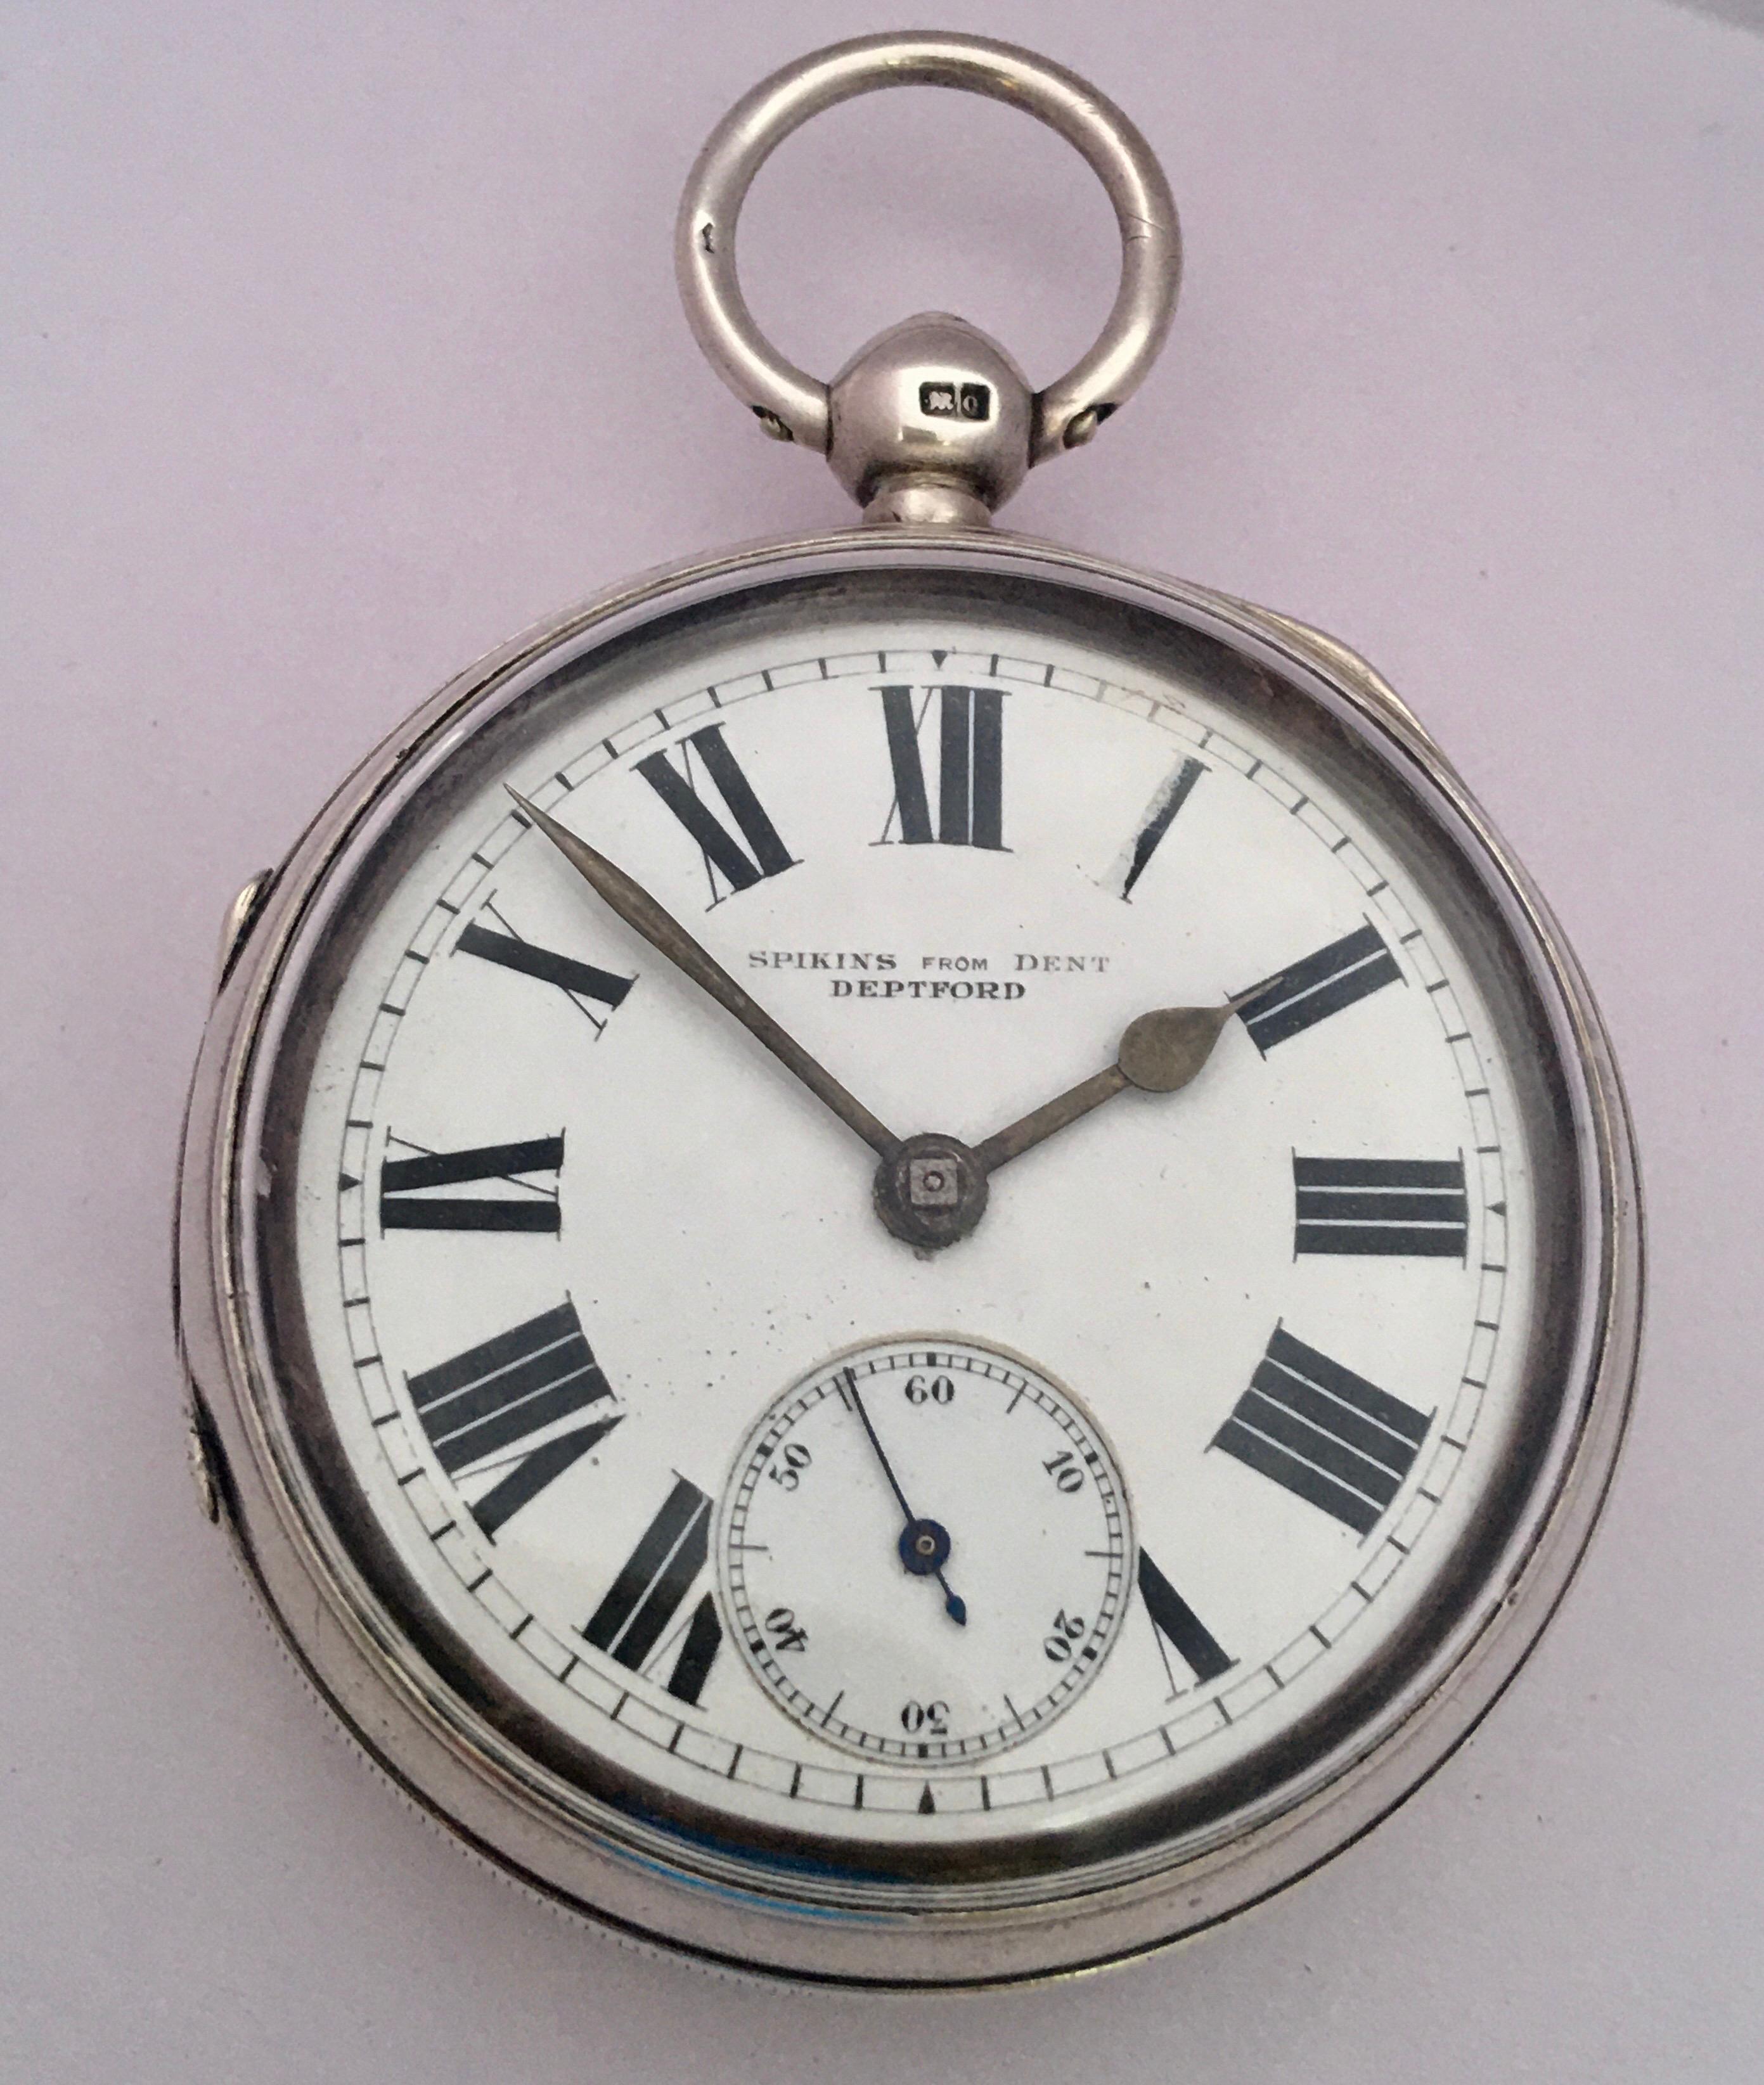 Antique Silver Key-Winding Pocket Watch Signed by Dent 2